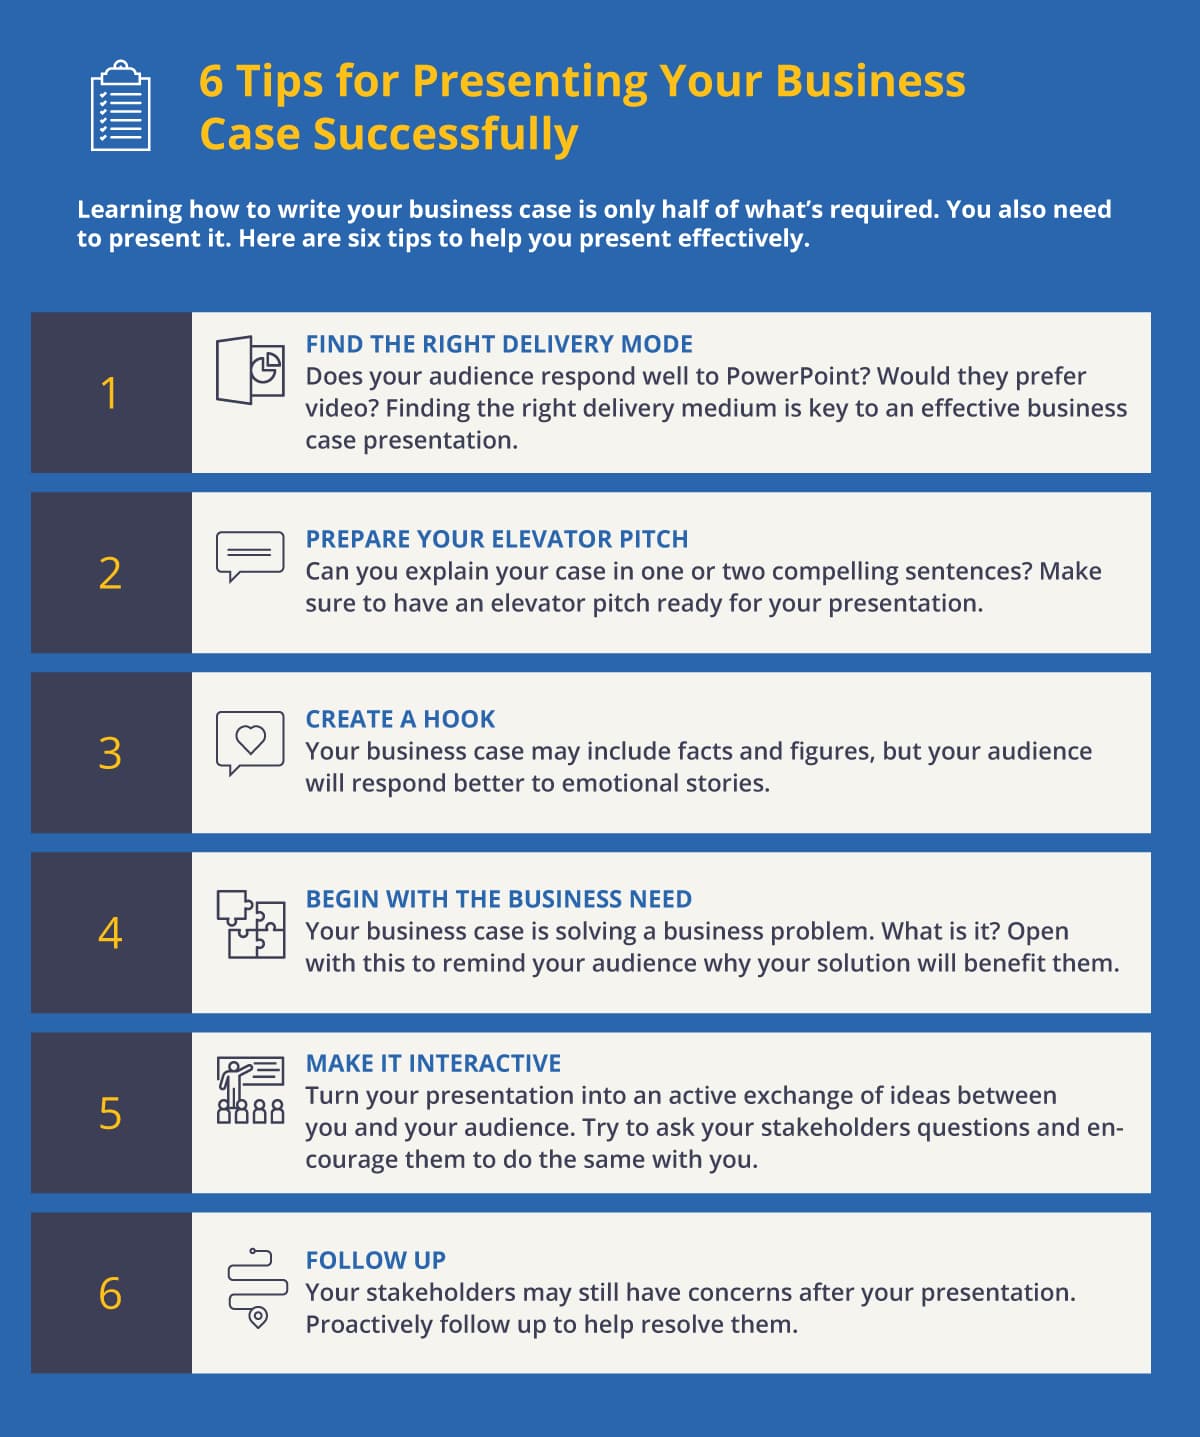 6 Tips for Presenting Your Business Case Successfully